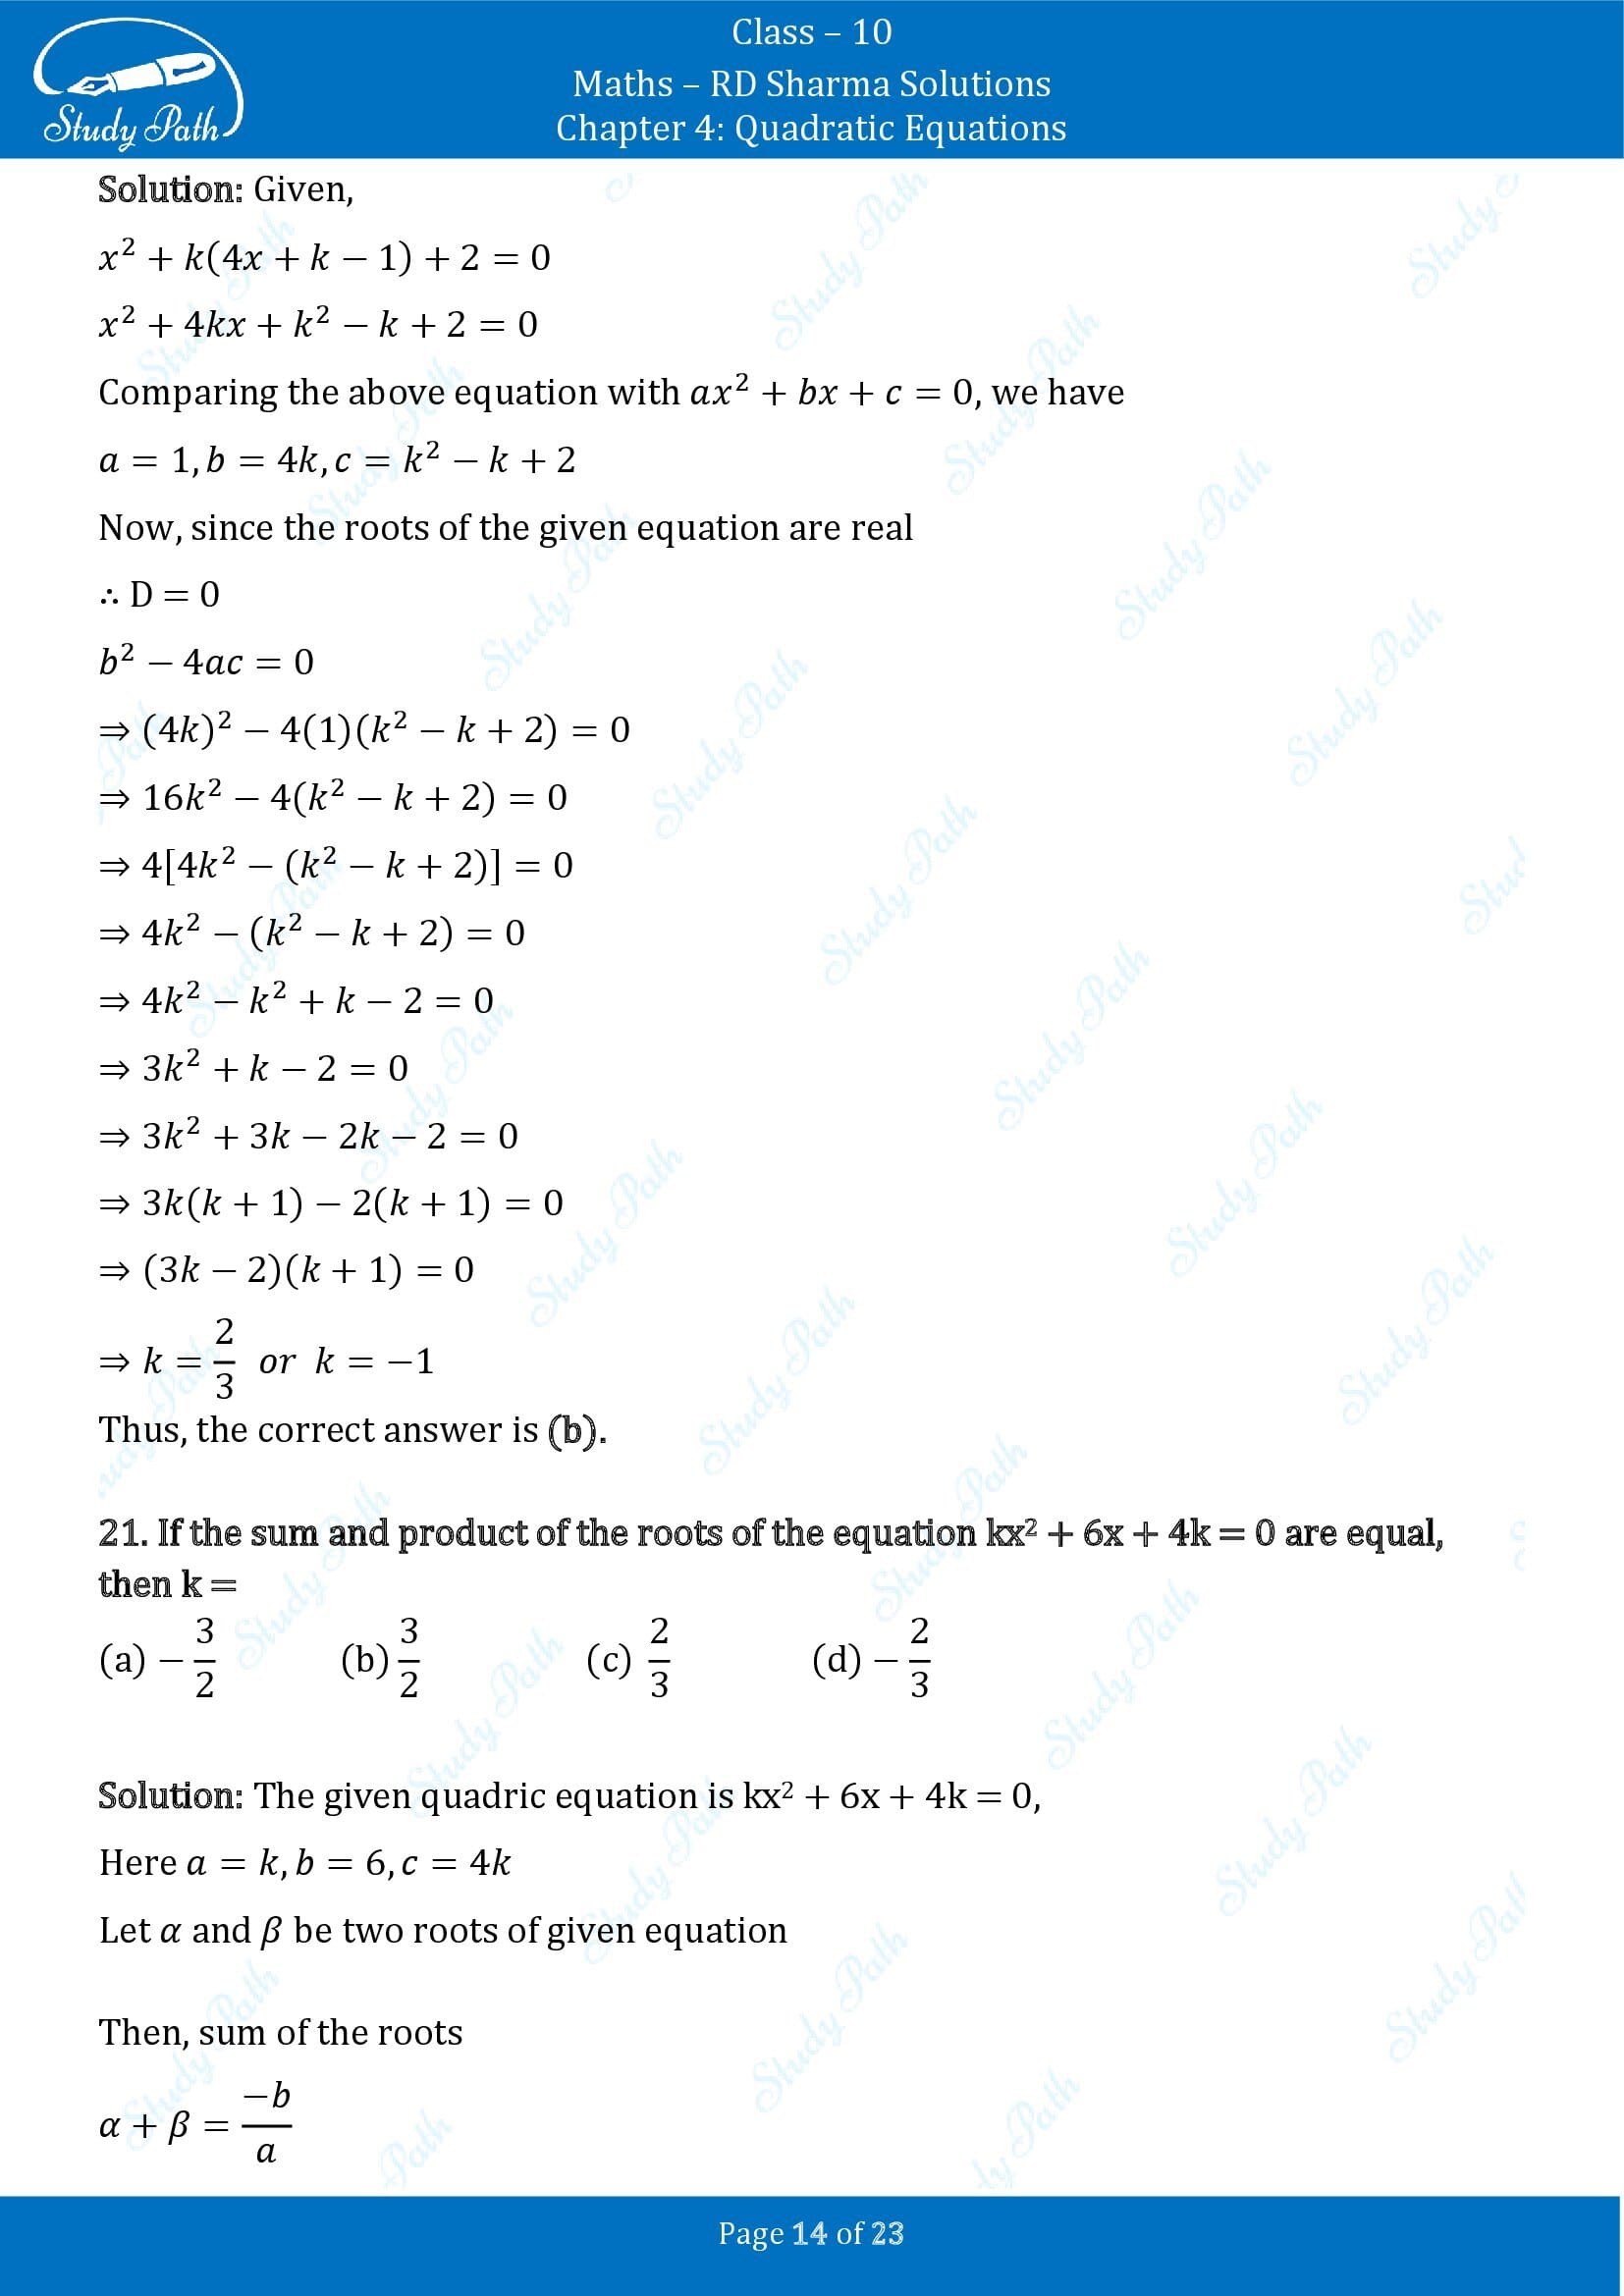 RD Sharma Solutions Class 10 Chapter 4 Quadratic Equations Multiple Choice Questions MCQs 00014